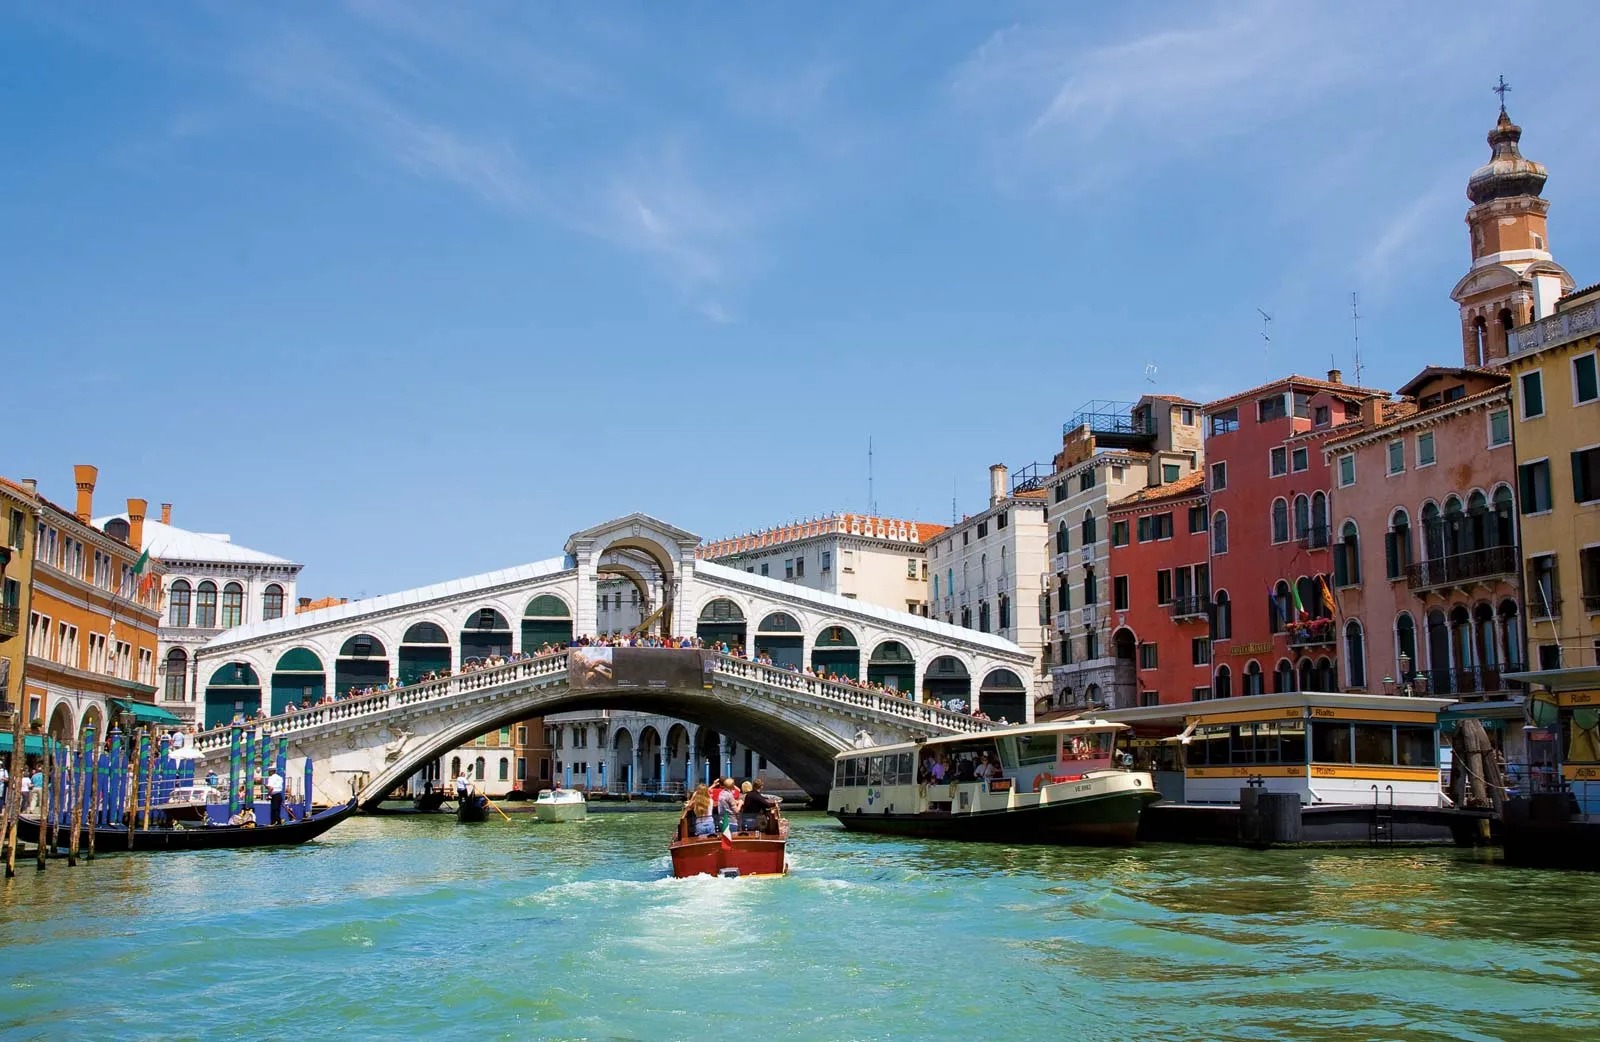 Take a Trip Around Italy in This Quiz — If You Get 18/25, You Win Rialto Bridge at Grand Canal, Venice, Italy